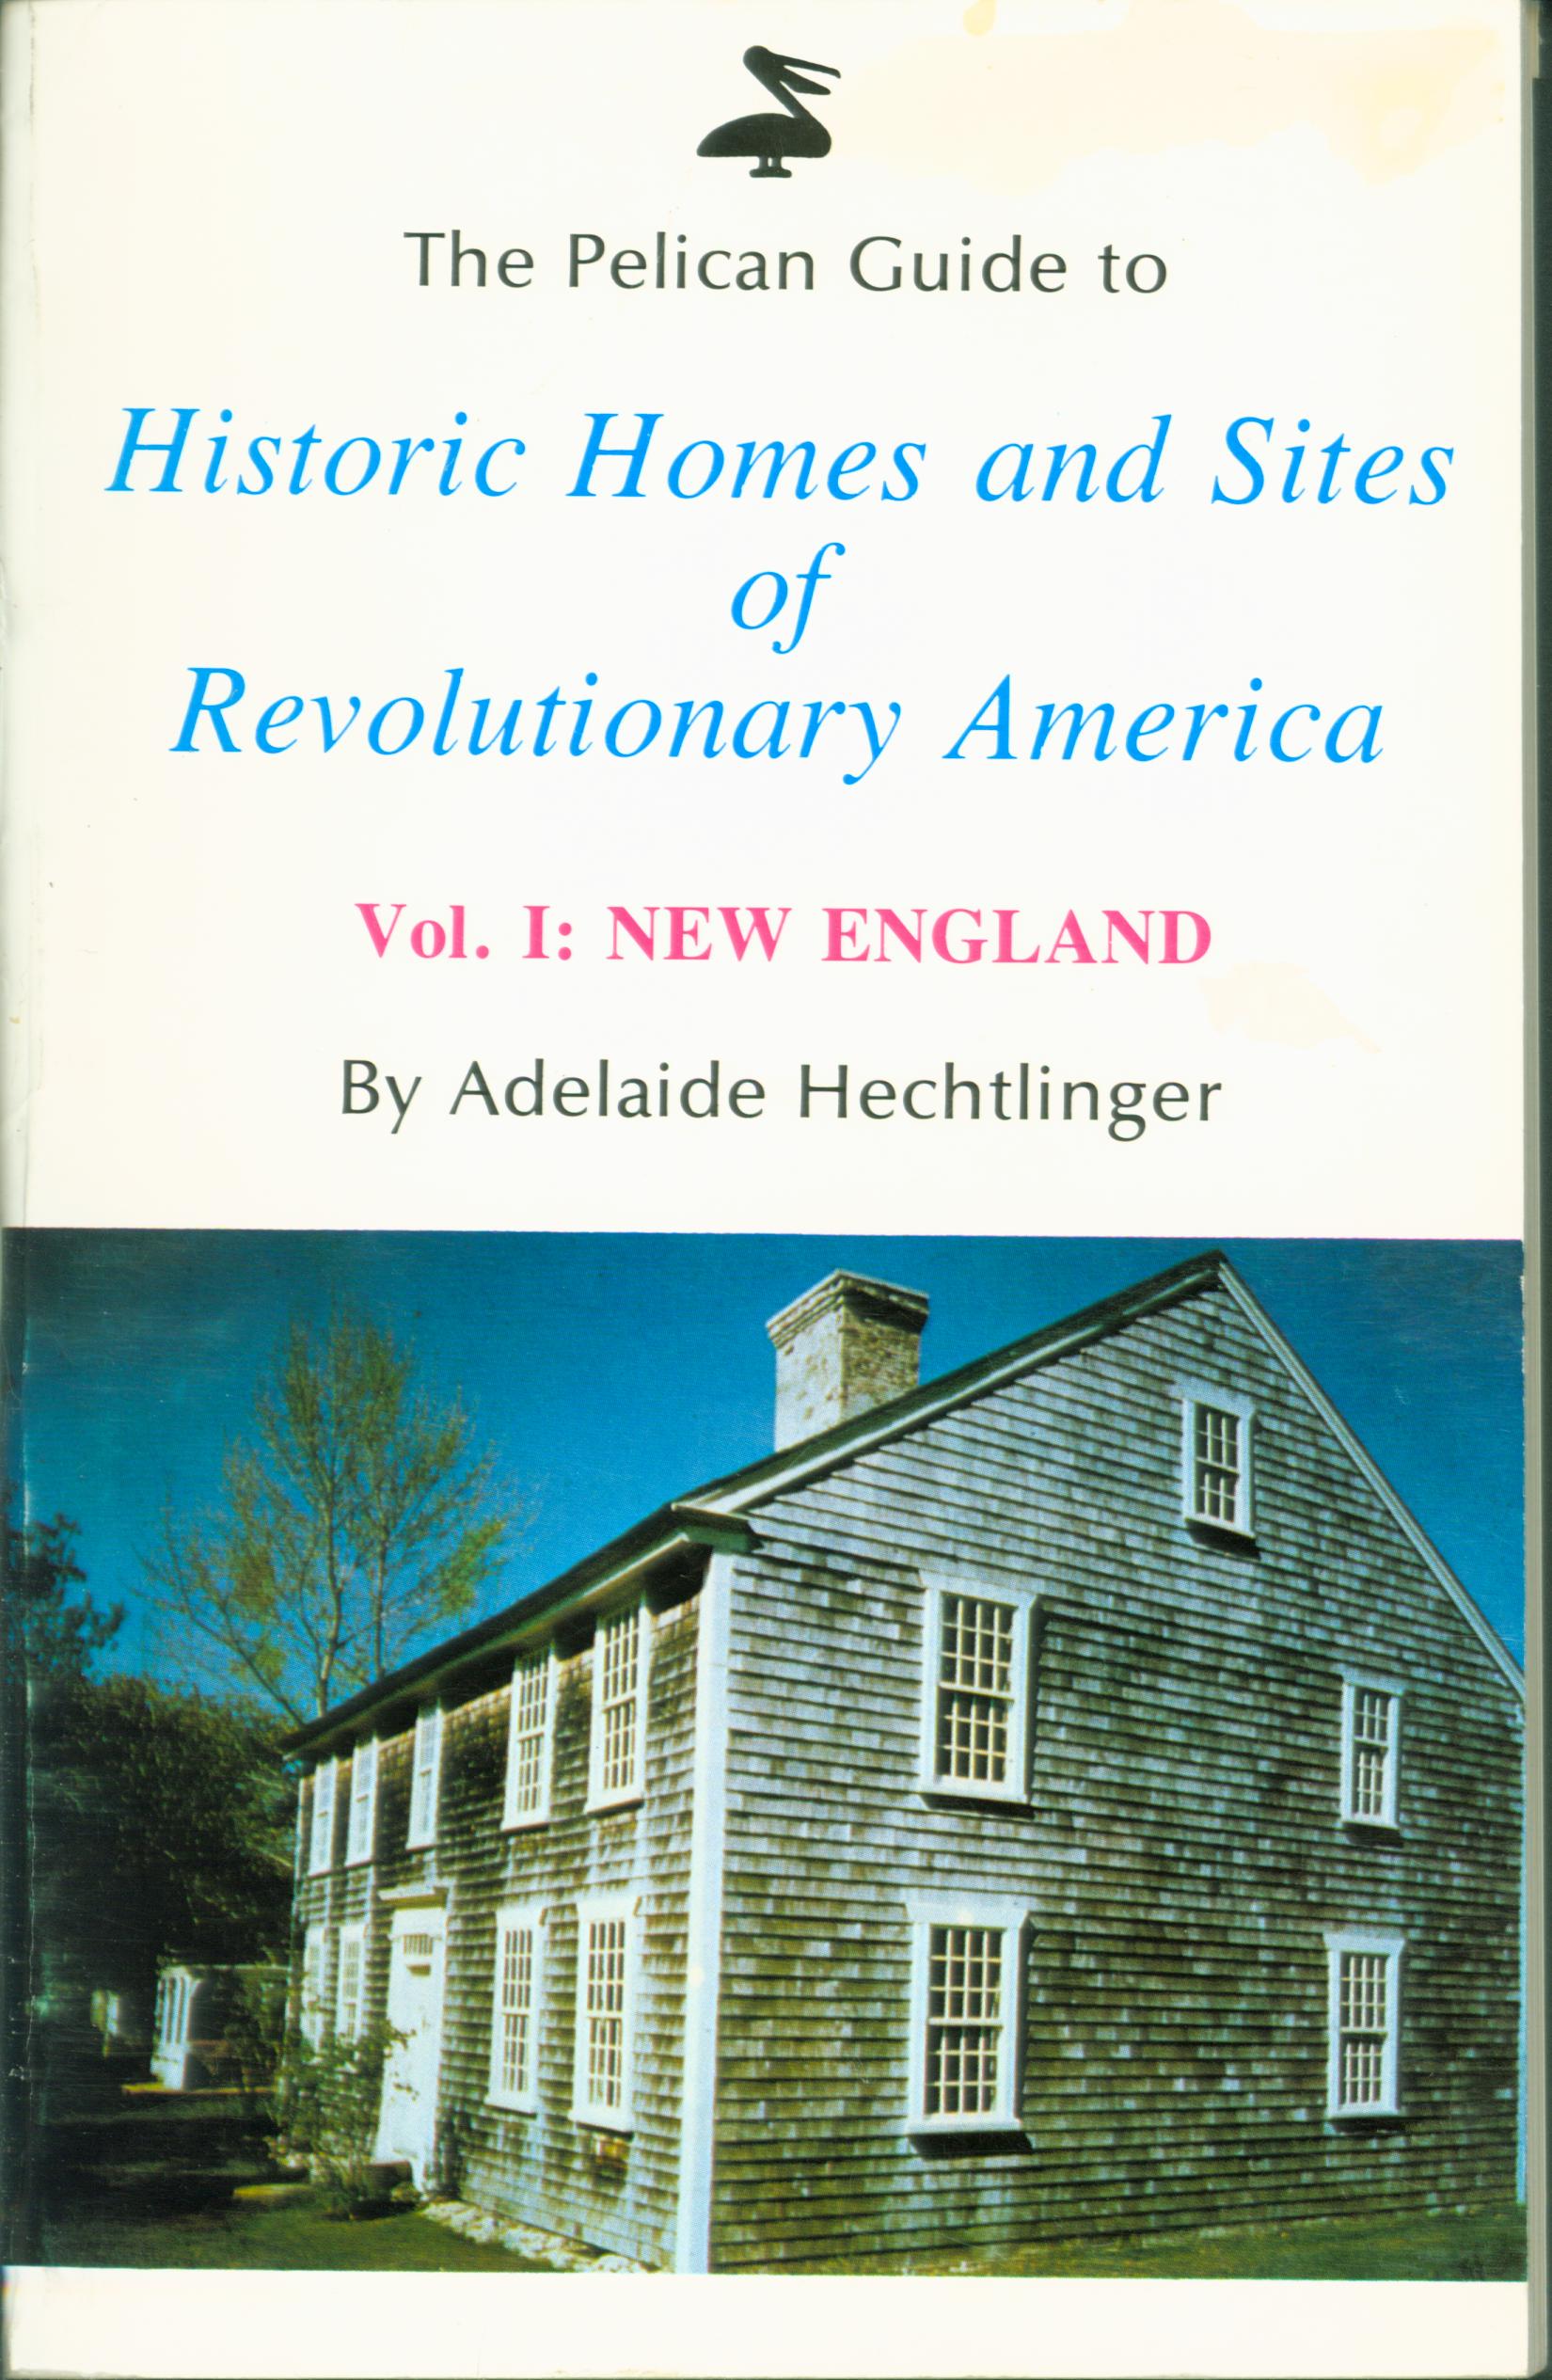 THE PELICAN GUIDE TO HISTORIC HOMES AND SITES OF REVOLUTIONARY AMERICA, Vol. 1: New England.